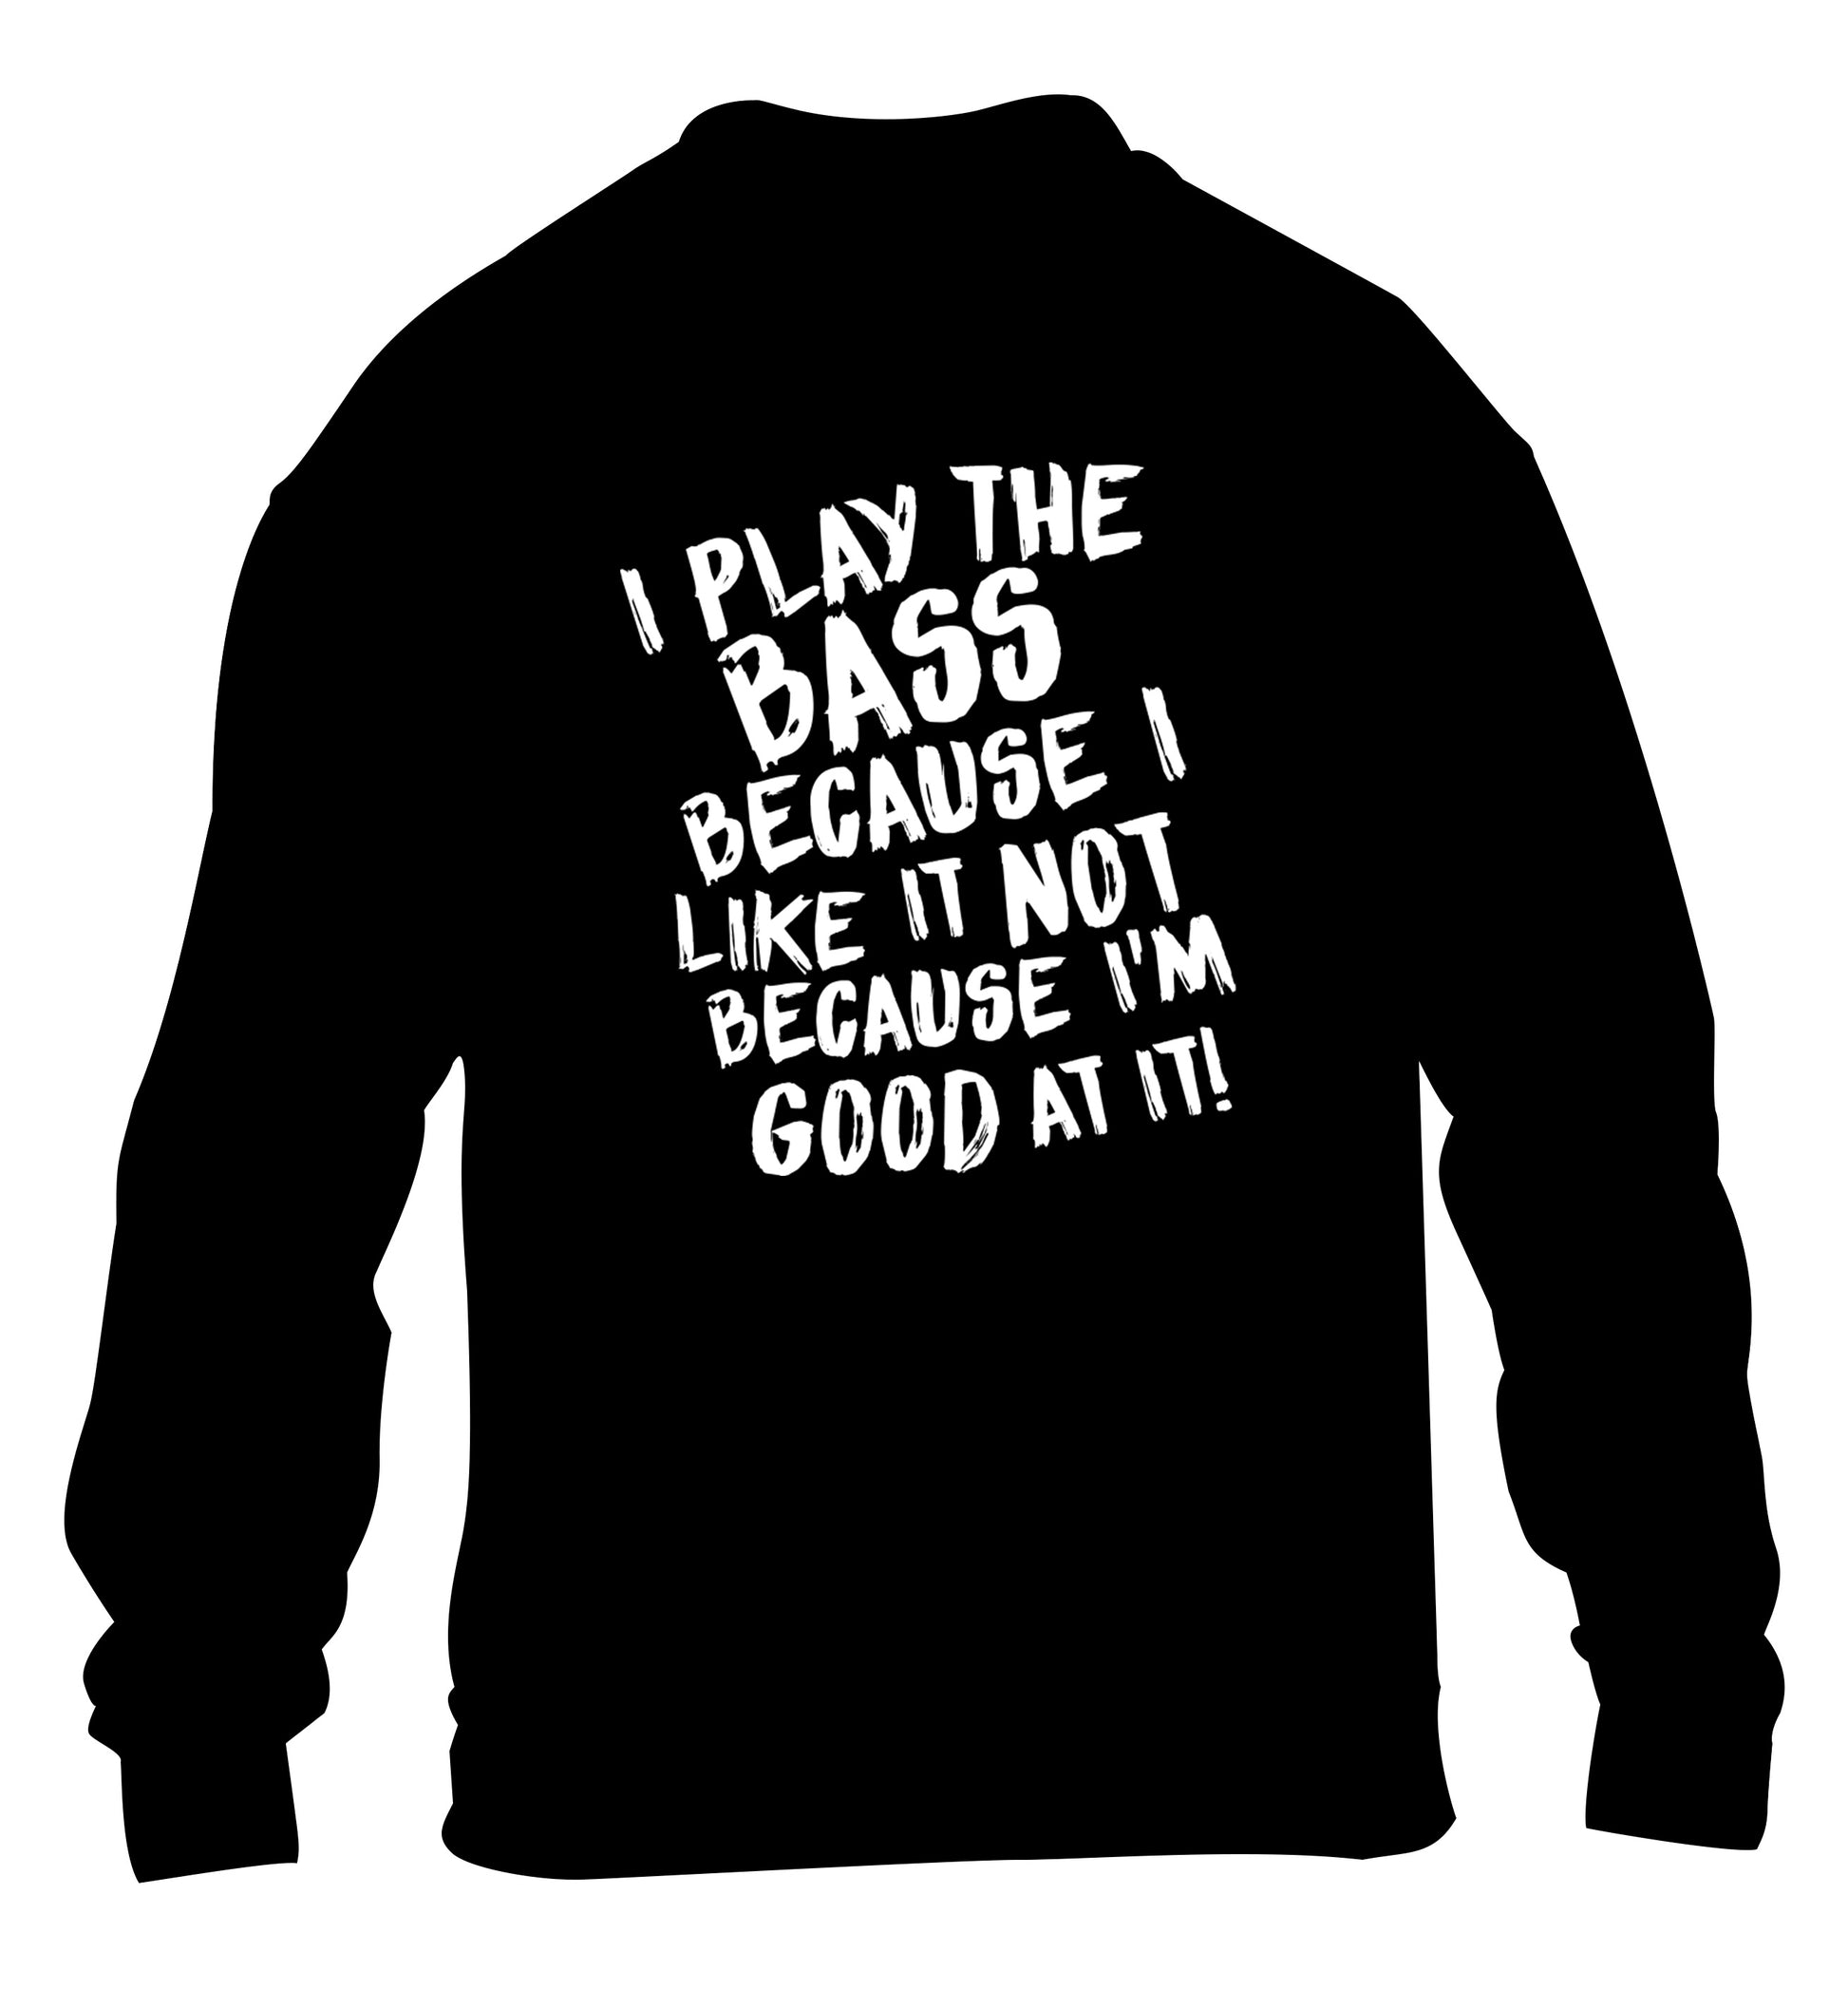 I play the bass because I like it not because I'm good at it children's black sweater 12-14 Years